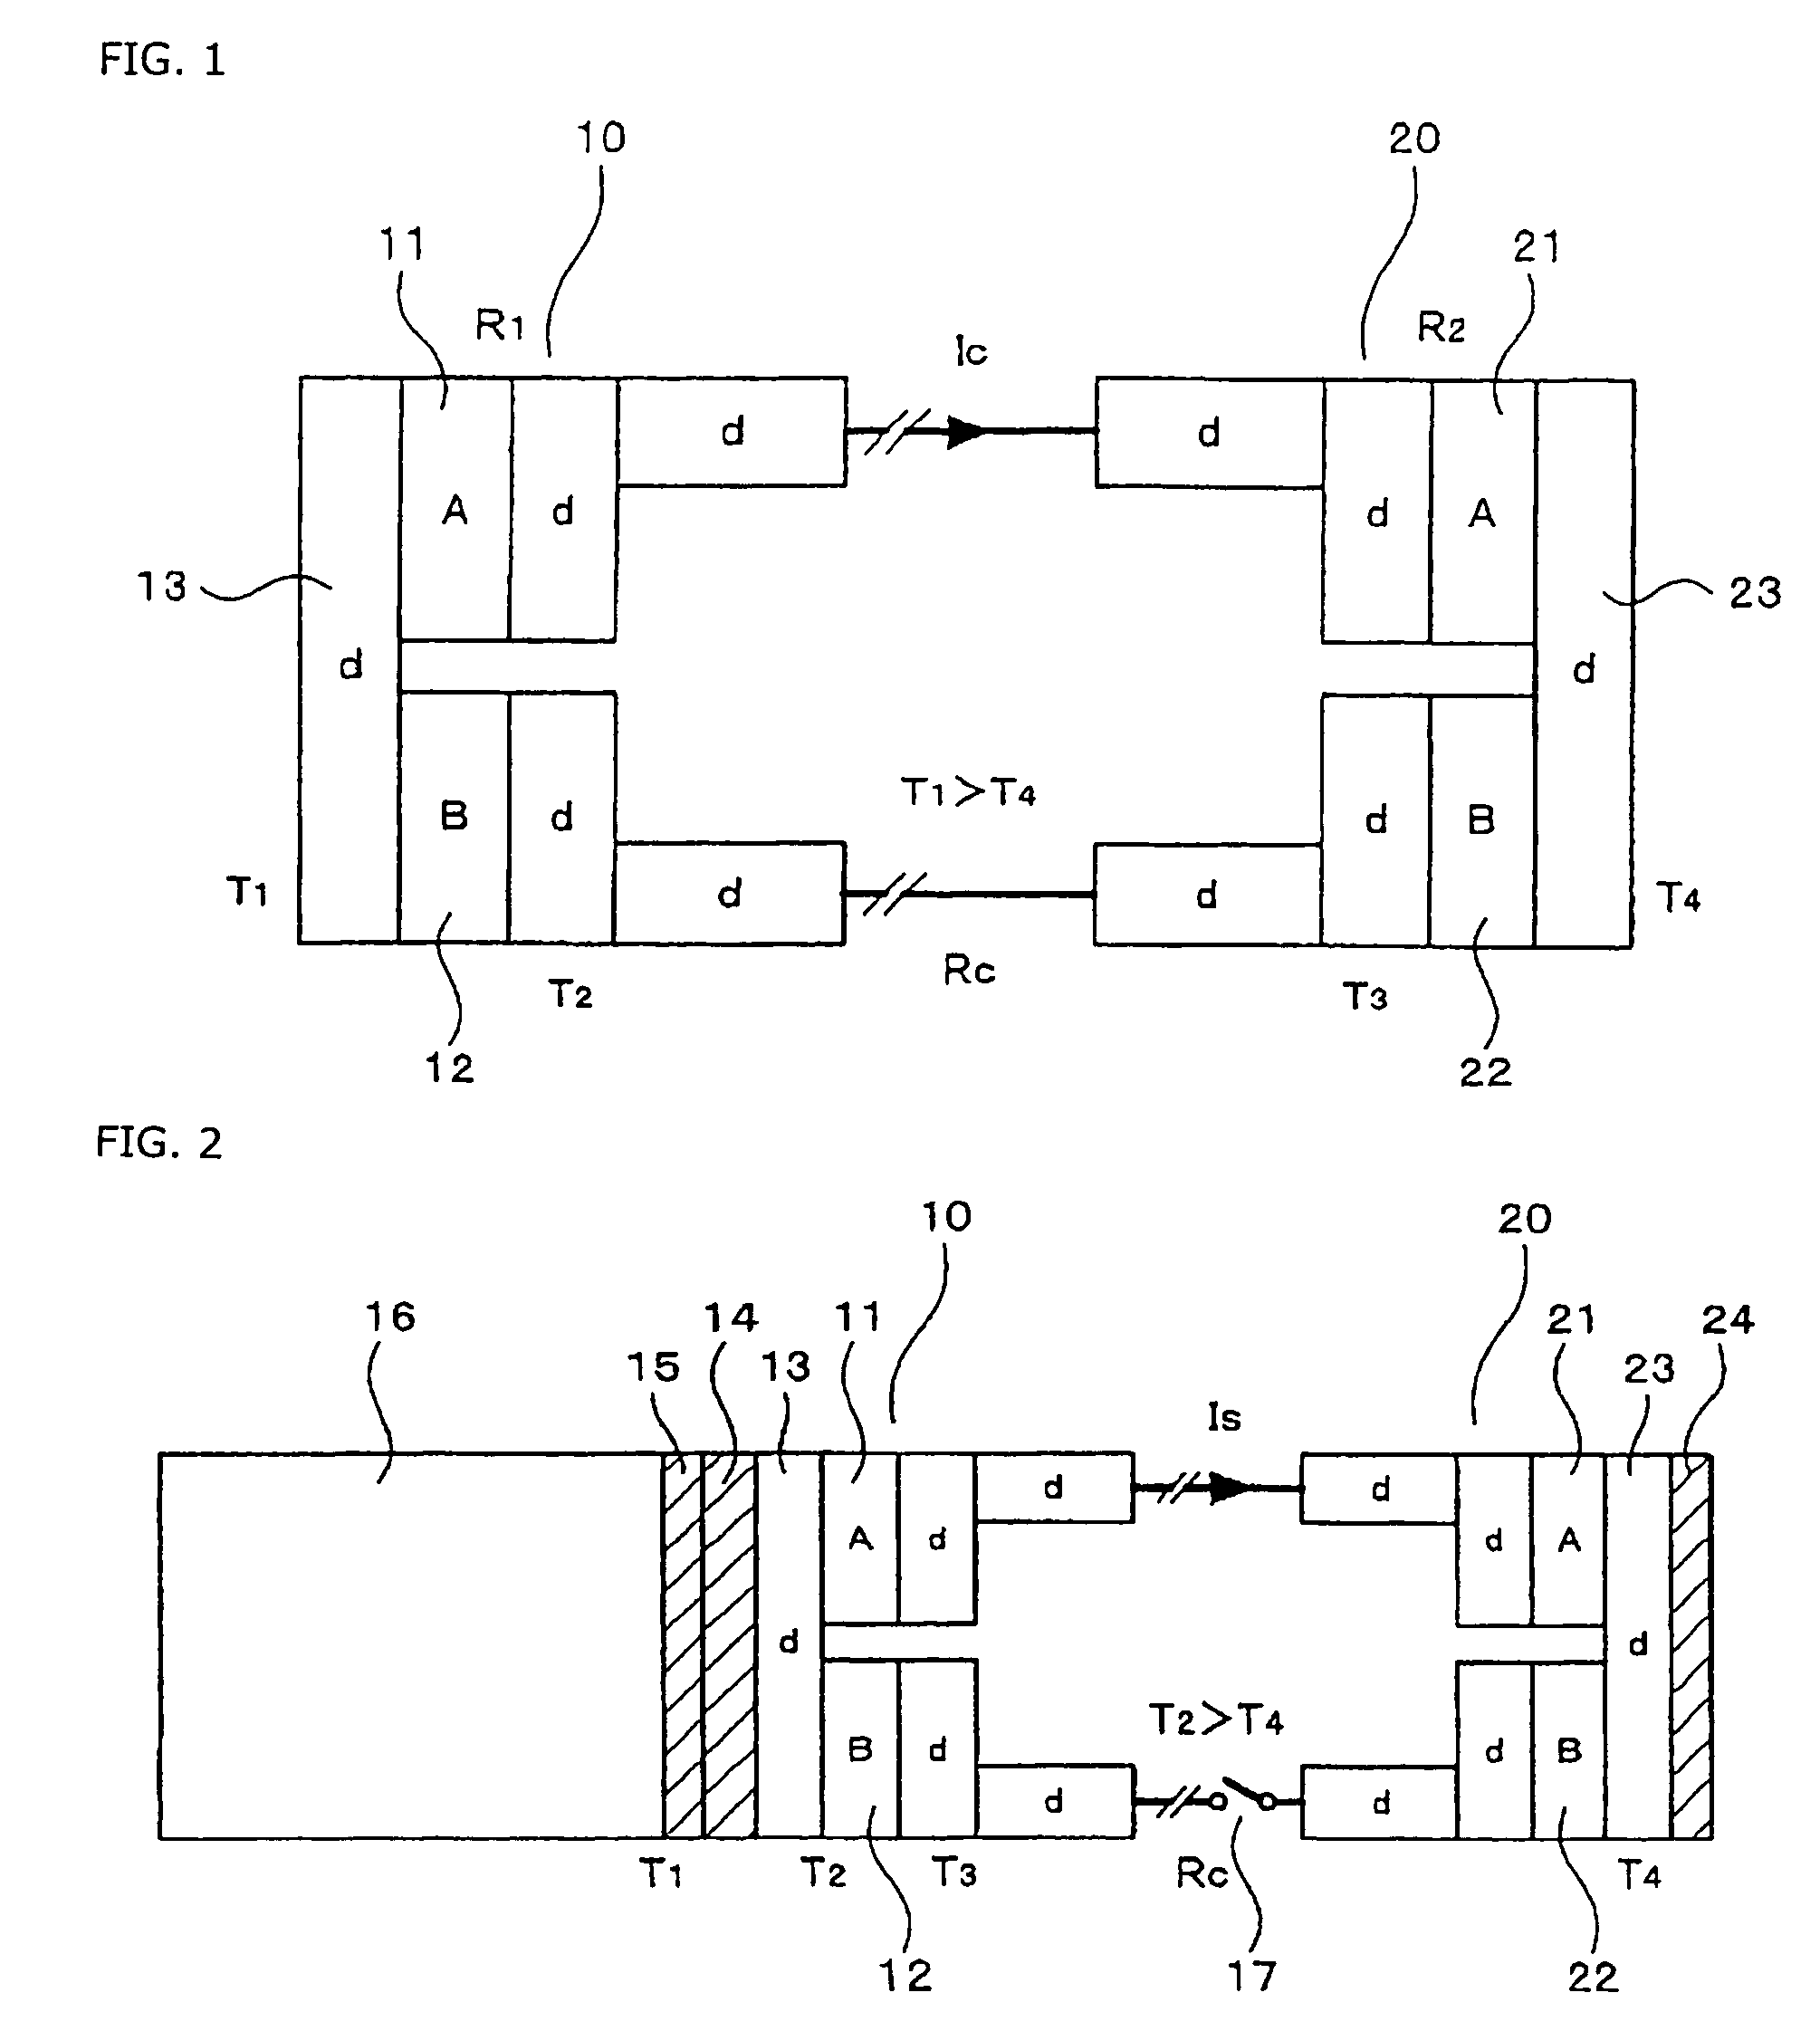 Thermal energy transfer circuit system